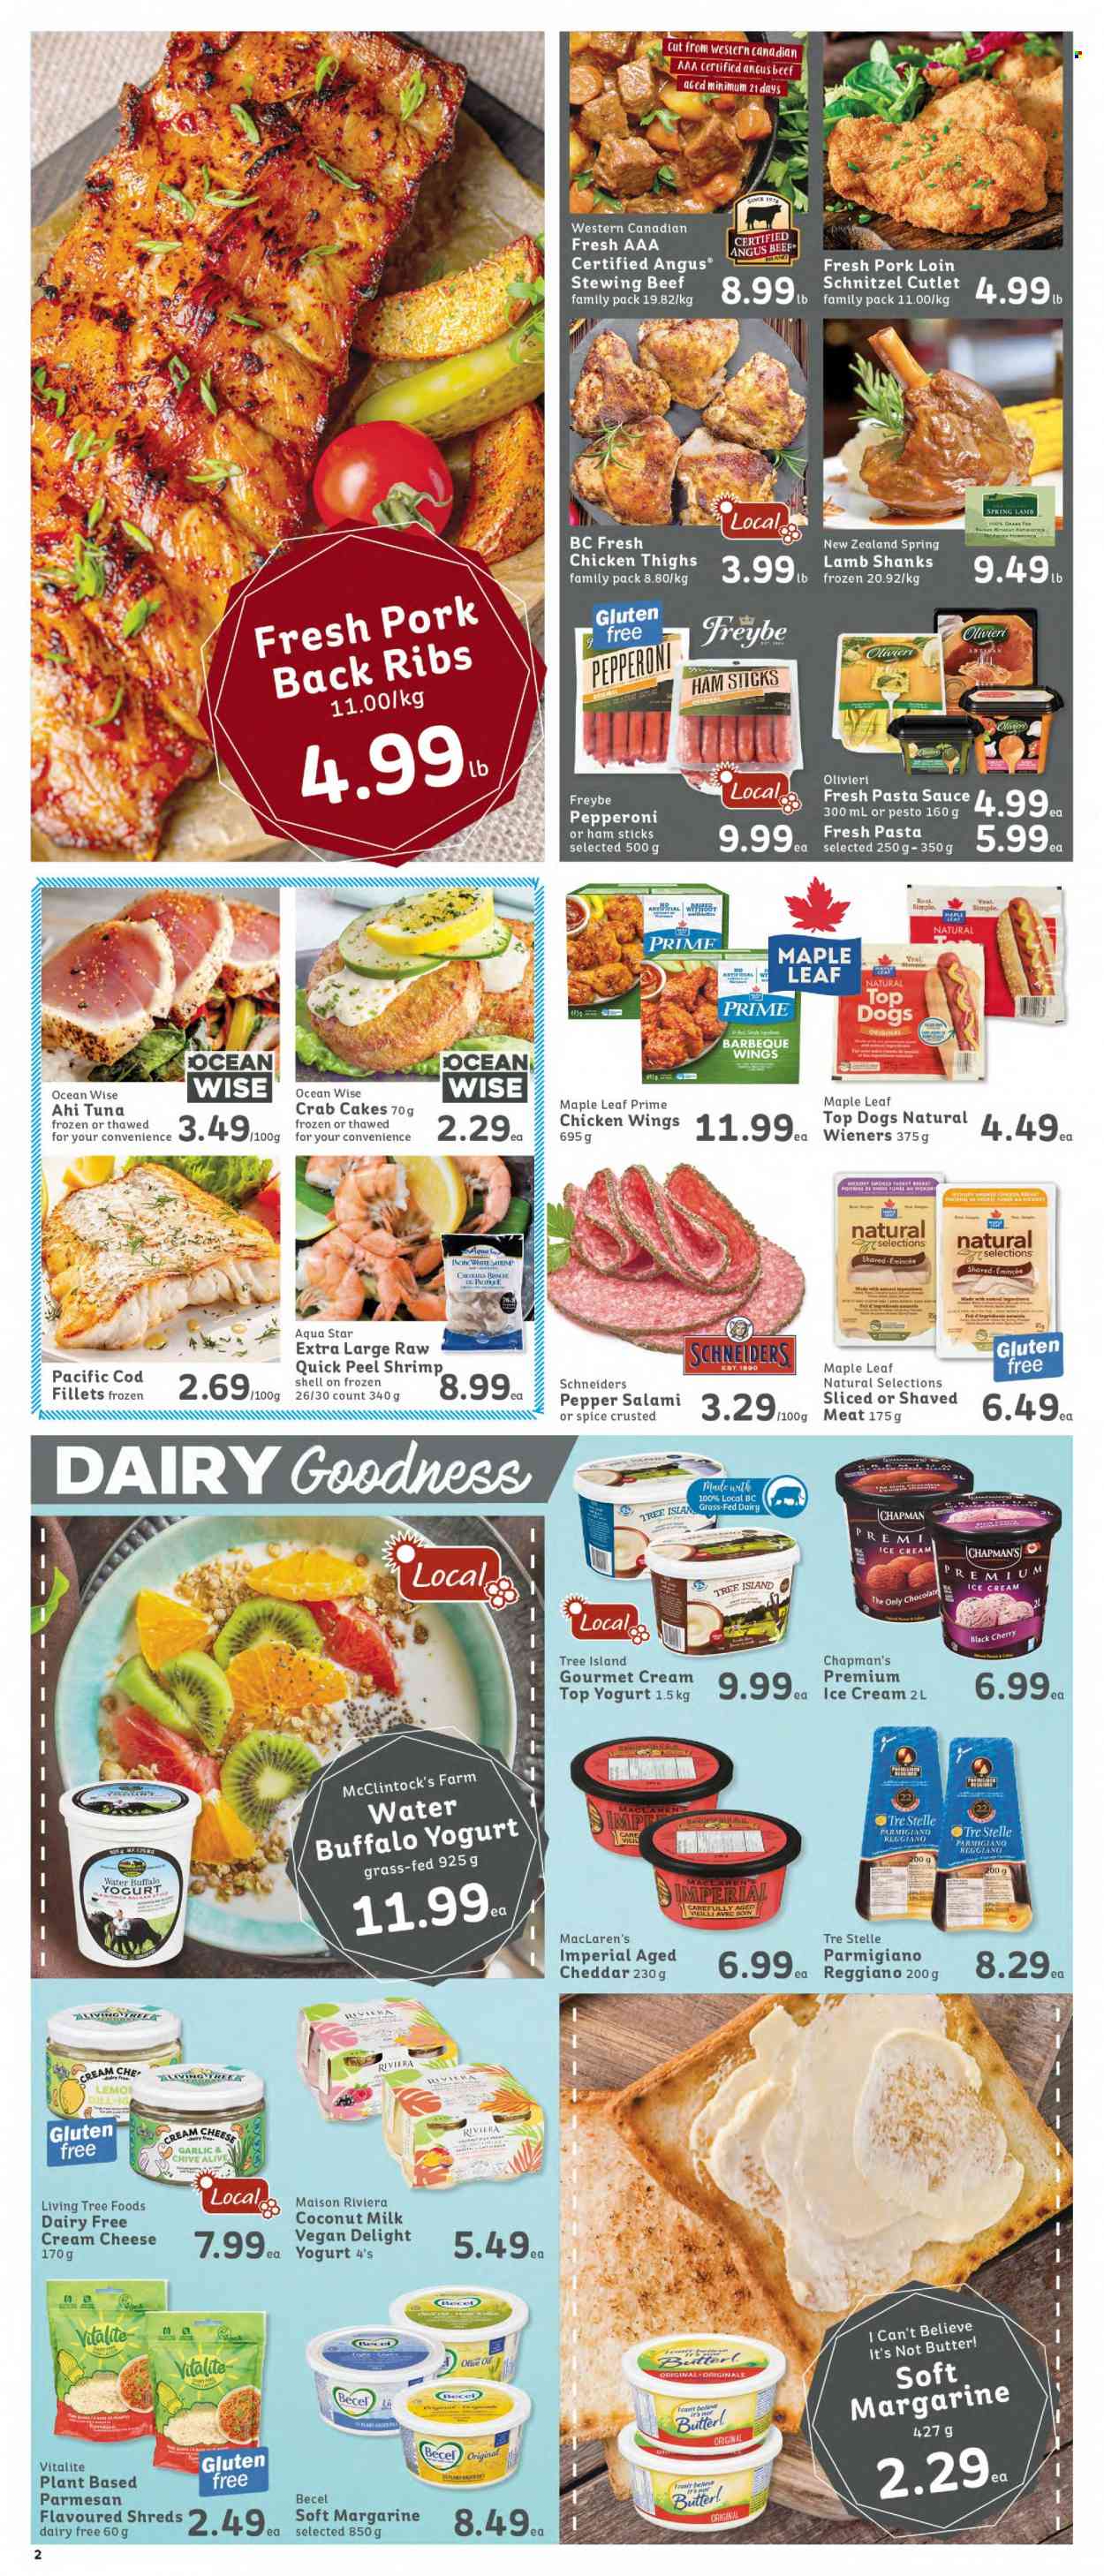 thumbnail - IGA Simple Goodness Flyer - January 27, 2023 - February 02, 2023 - Sales products - cherries, cod, tuna, shrimps, crab cake, pasta sauce, schnitzel, salami, pepperoni, cream cheese, cheddar, parmesan, cheese, Parmigiano Reggiano, yoghurt, margarine, I Can't Believe It's Not Butter, chicken wings, coconut milk, dill, pepper, spice, olive oil, oil, chicken breasts, chicken thighs, chicken, beef meat, stewing beef, ribs, pork loin, pork meat, pork ribs, pork back ribs, pesto. Page 2.